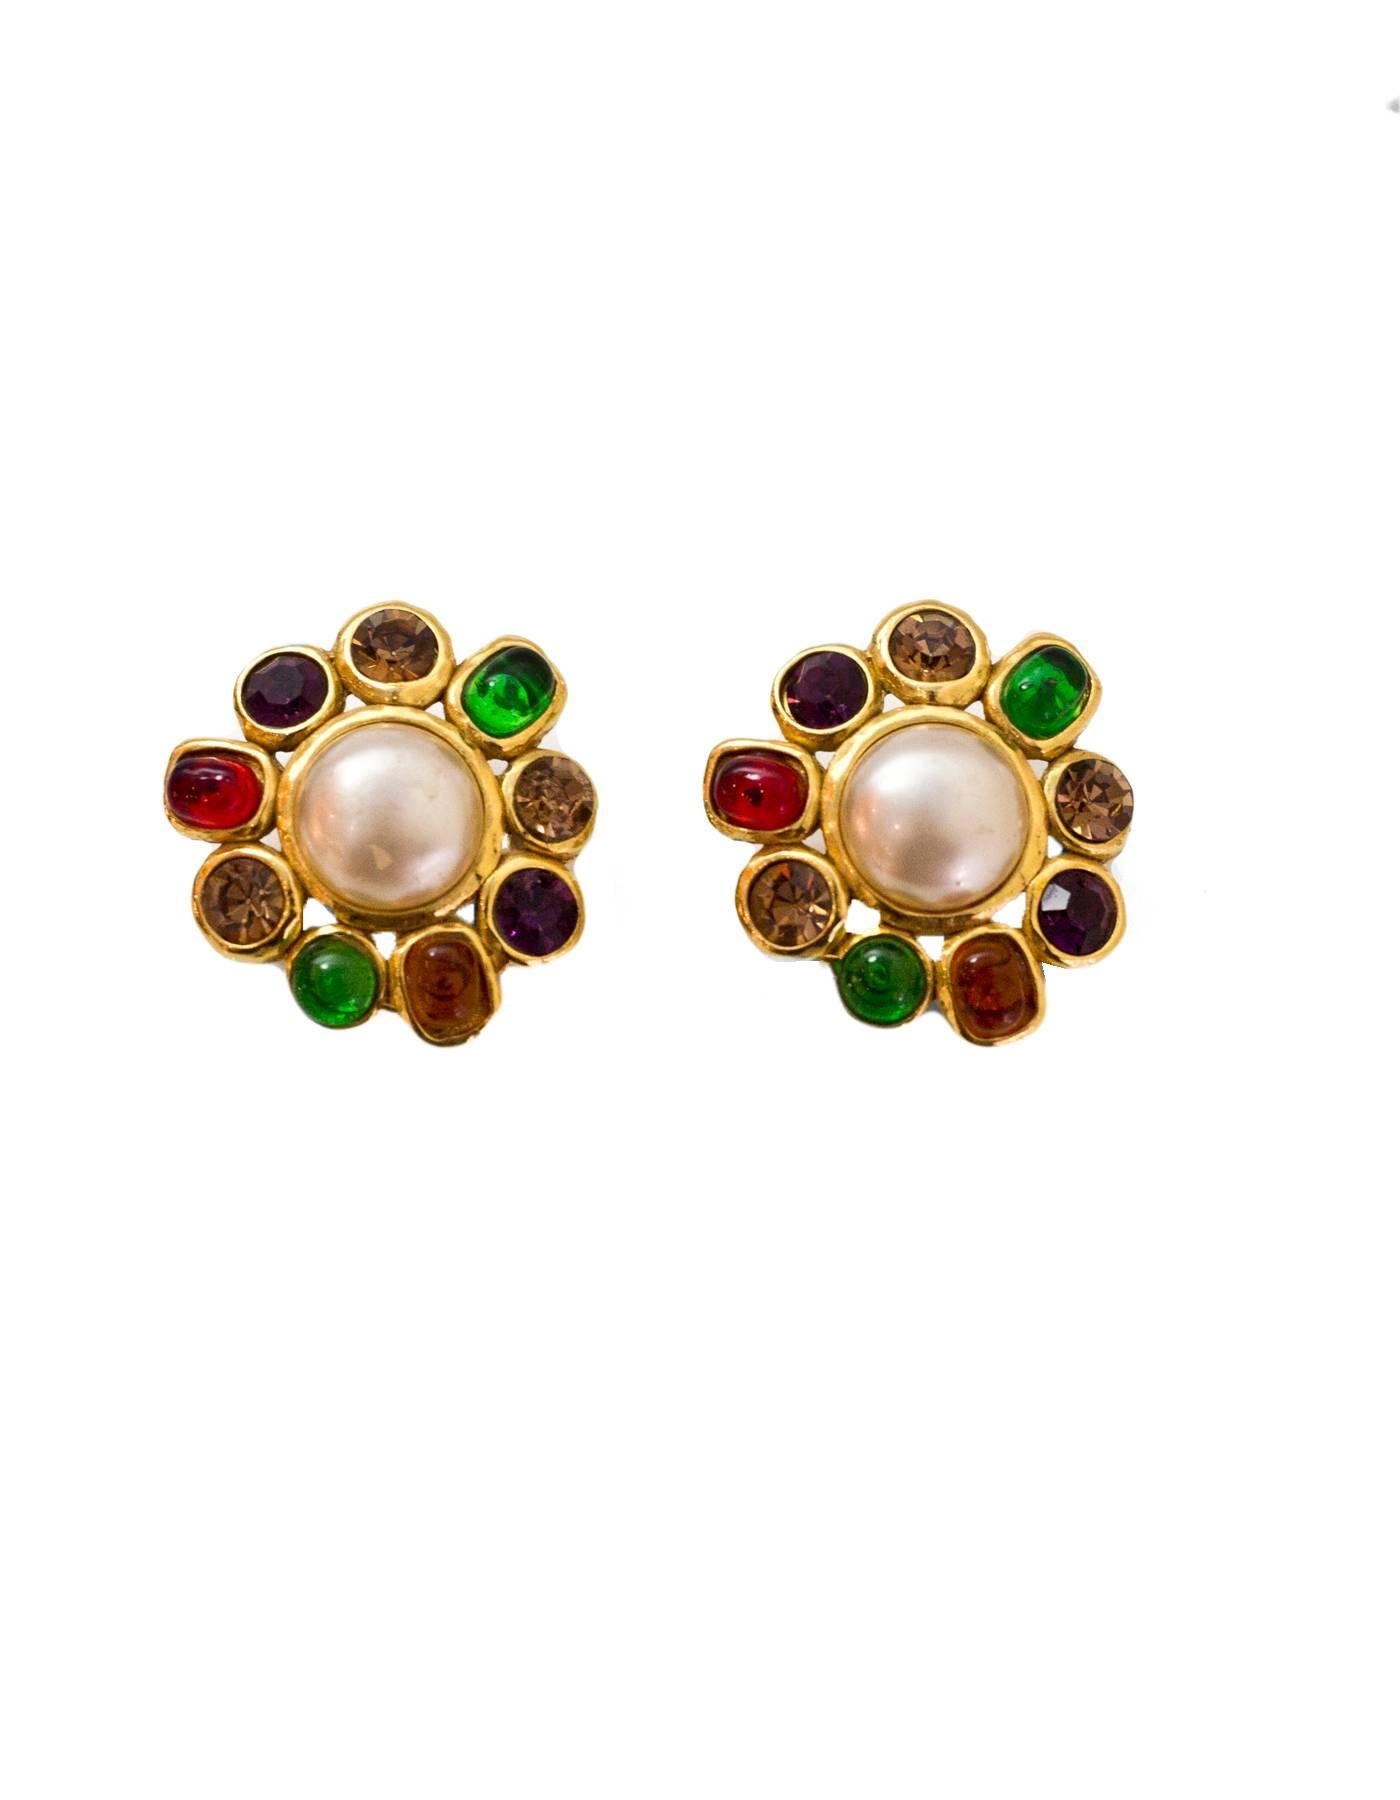 Chanel Vintage '87 Multi-Color Gripoix, Rhinestone & Pearl Clip On Earrings
Features large faux pearl center surrounded by alternating gripoix and rhinestones
Made in: France
Year of Production: 1987
Stamp: 2 CC 6
Closure: Clip on
Color: